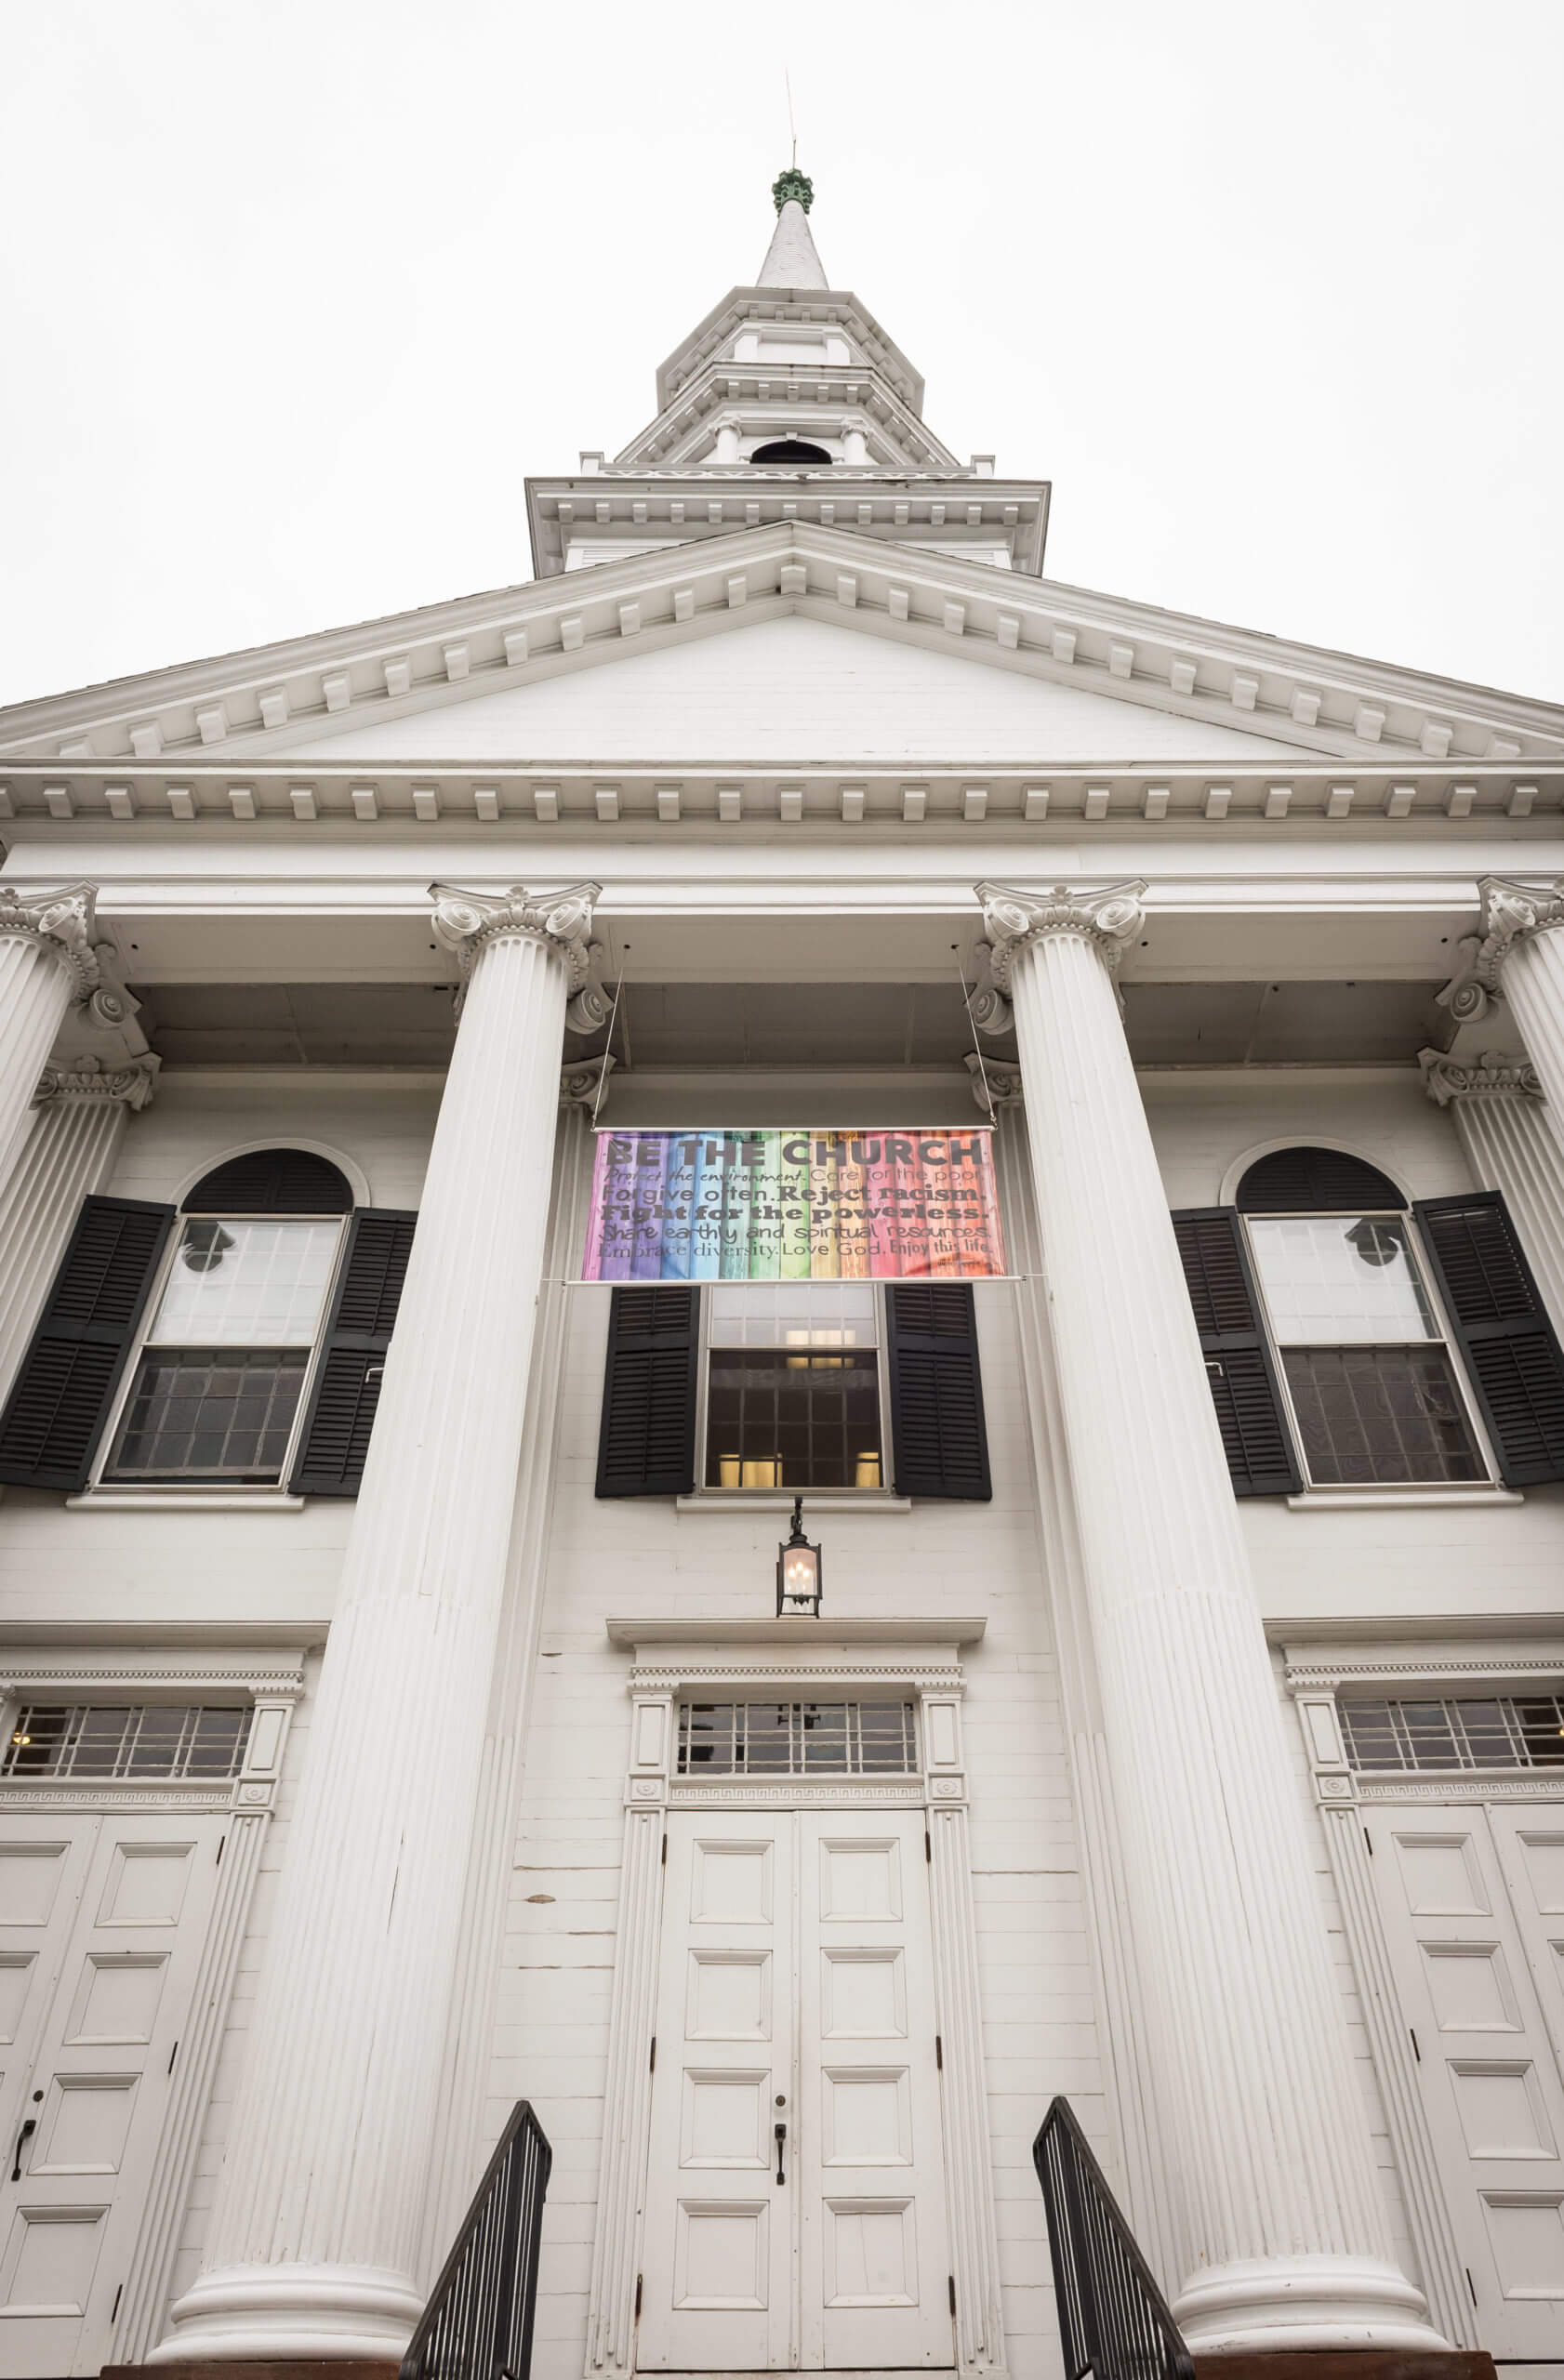 A view looking up at the front of a church. A sign hangs above the doors of the church. The sign is rainbow colored.